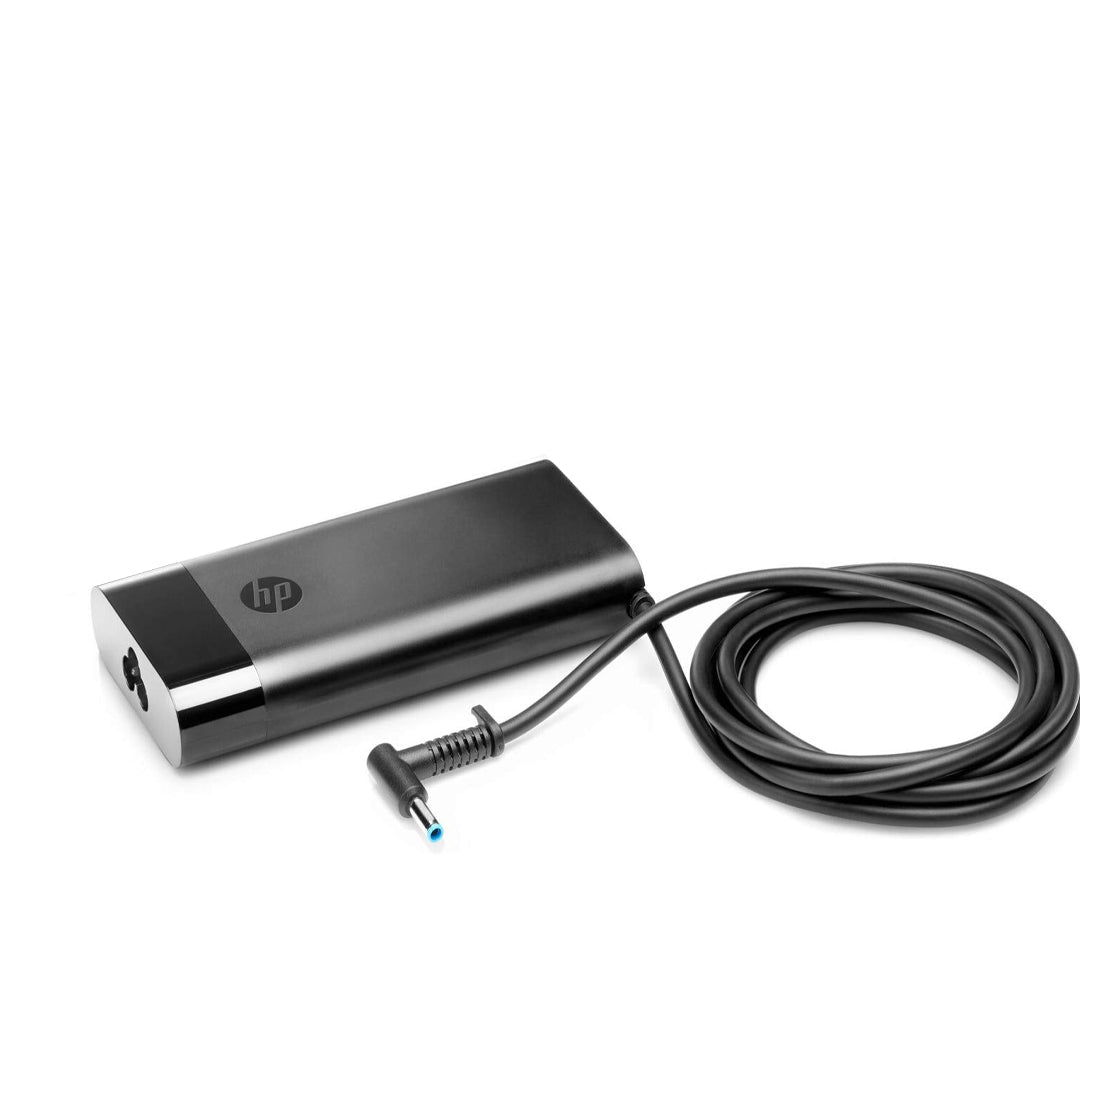 HP Original 150W 4.5mm Pin High Power Laptop Charger Adapter for ZBook Studio G3 Mobile Workstation With Power Cord